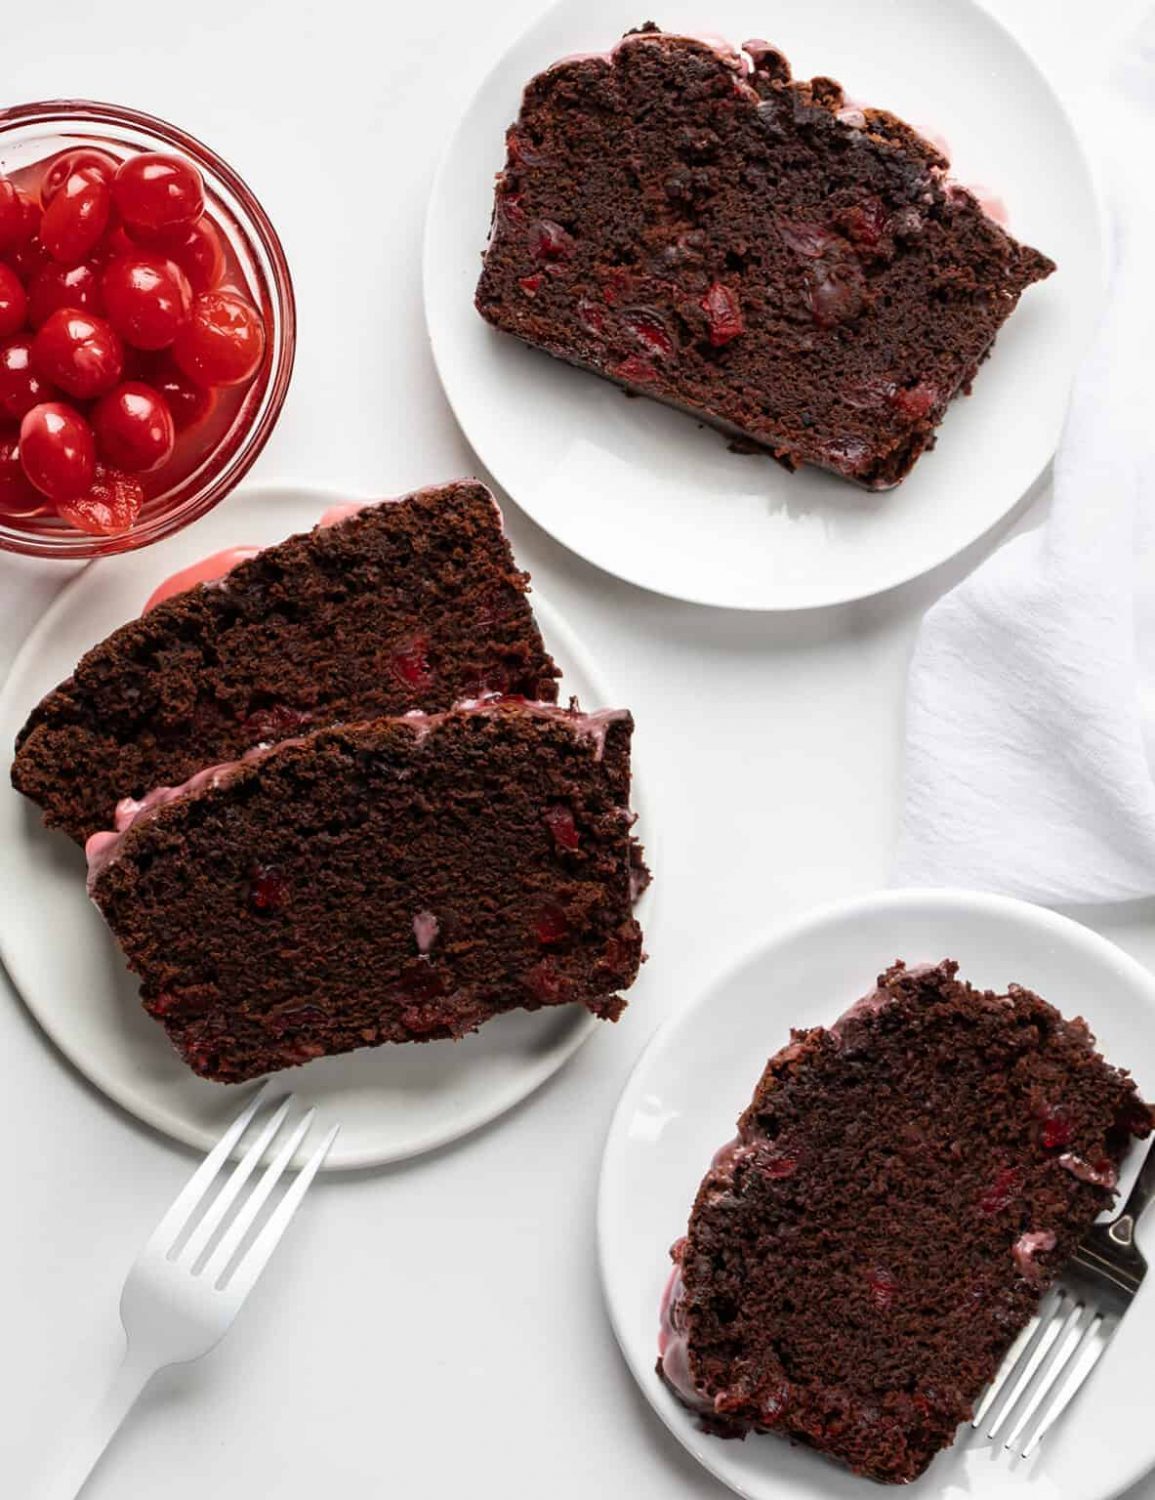 Decadent Cherry-Chocolate Fusion: Indulge in Cherry Brownie Bread